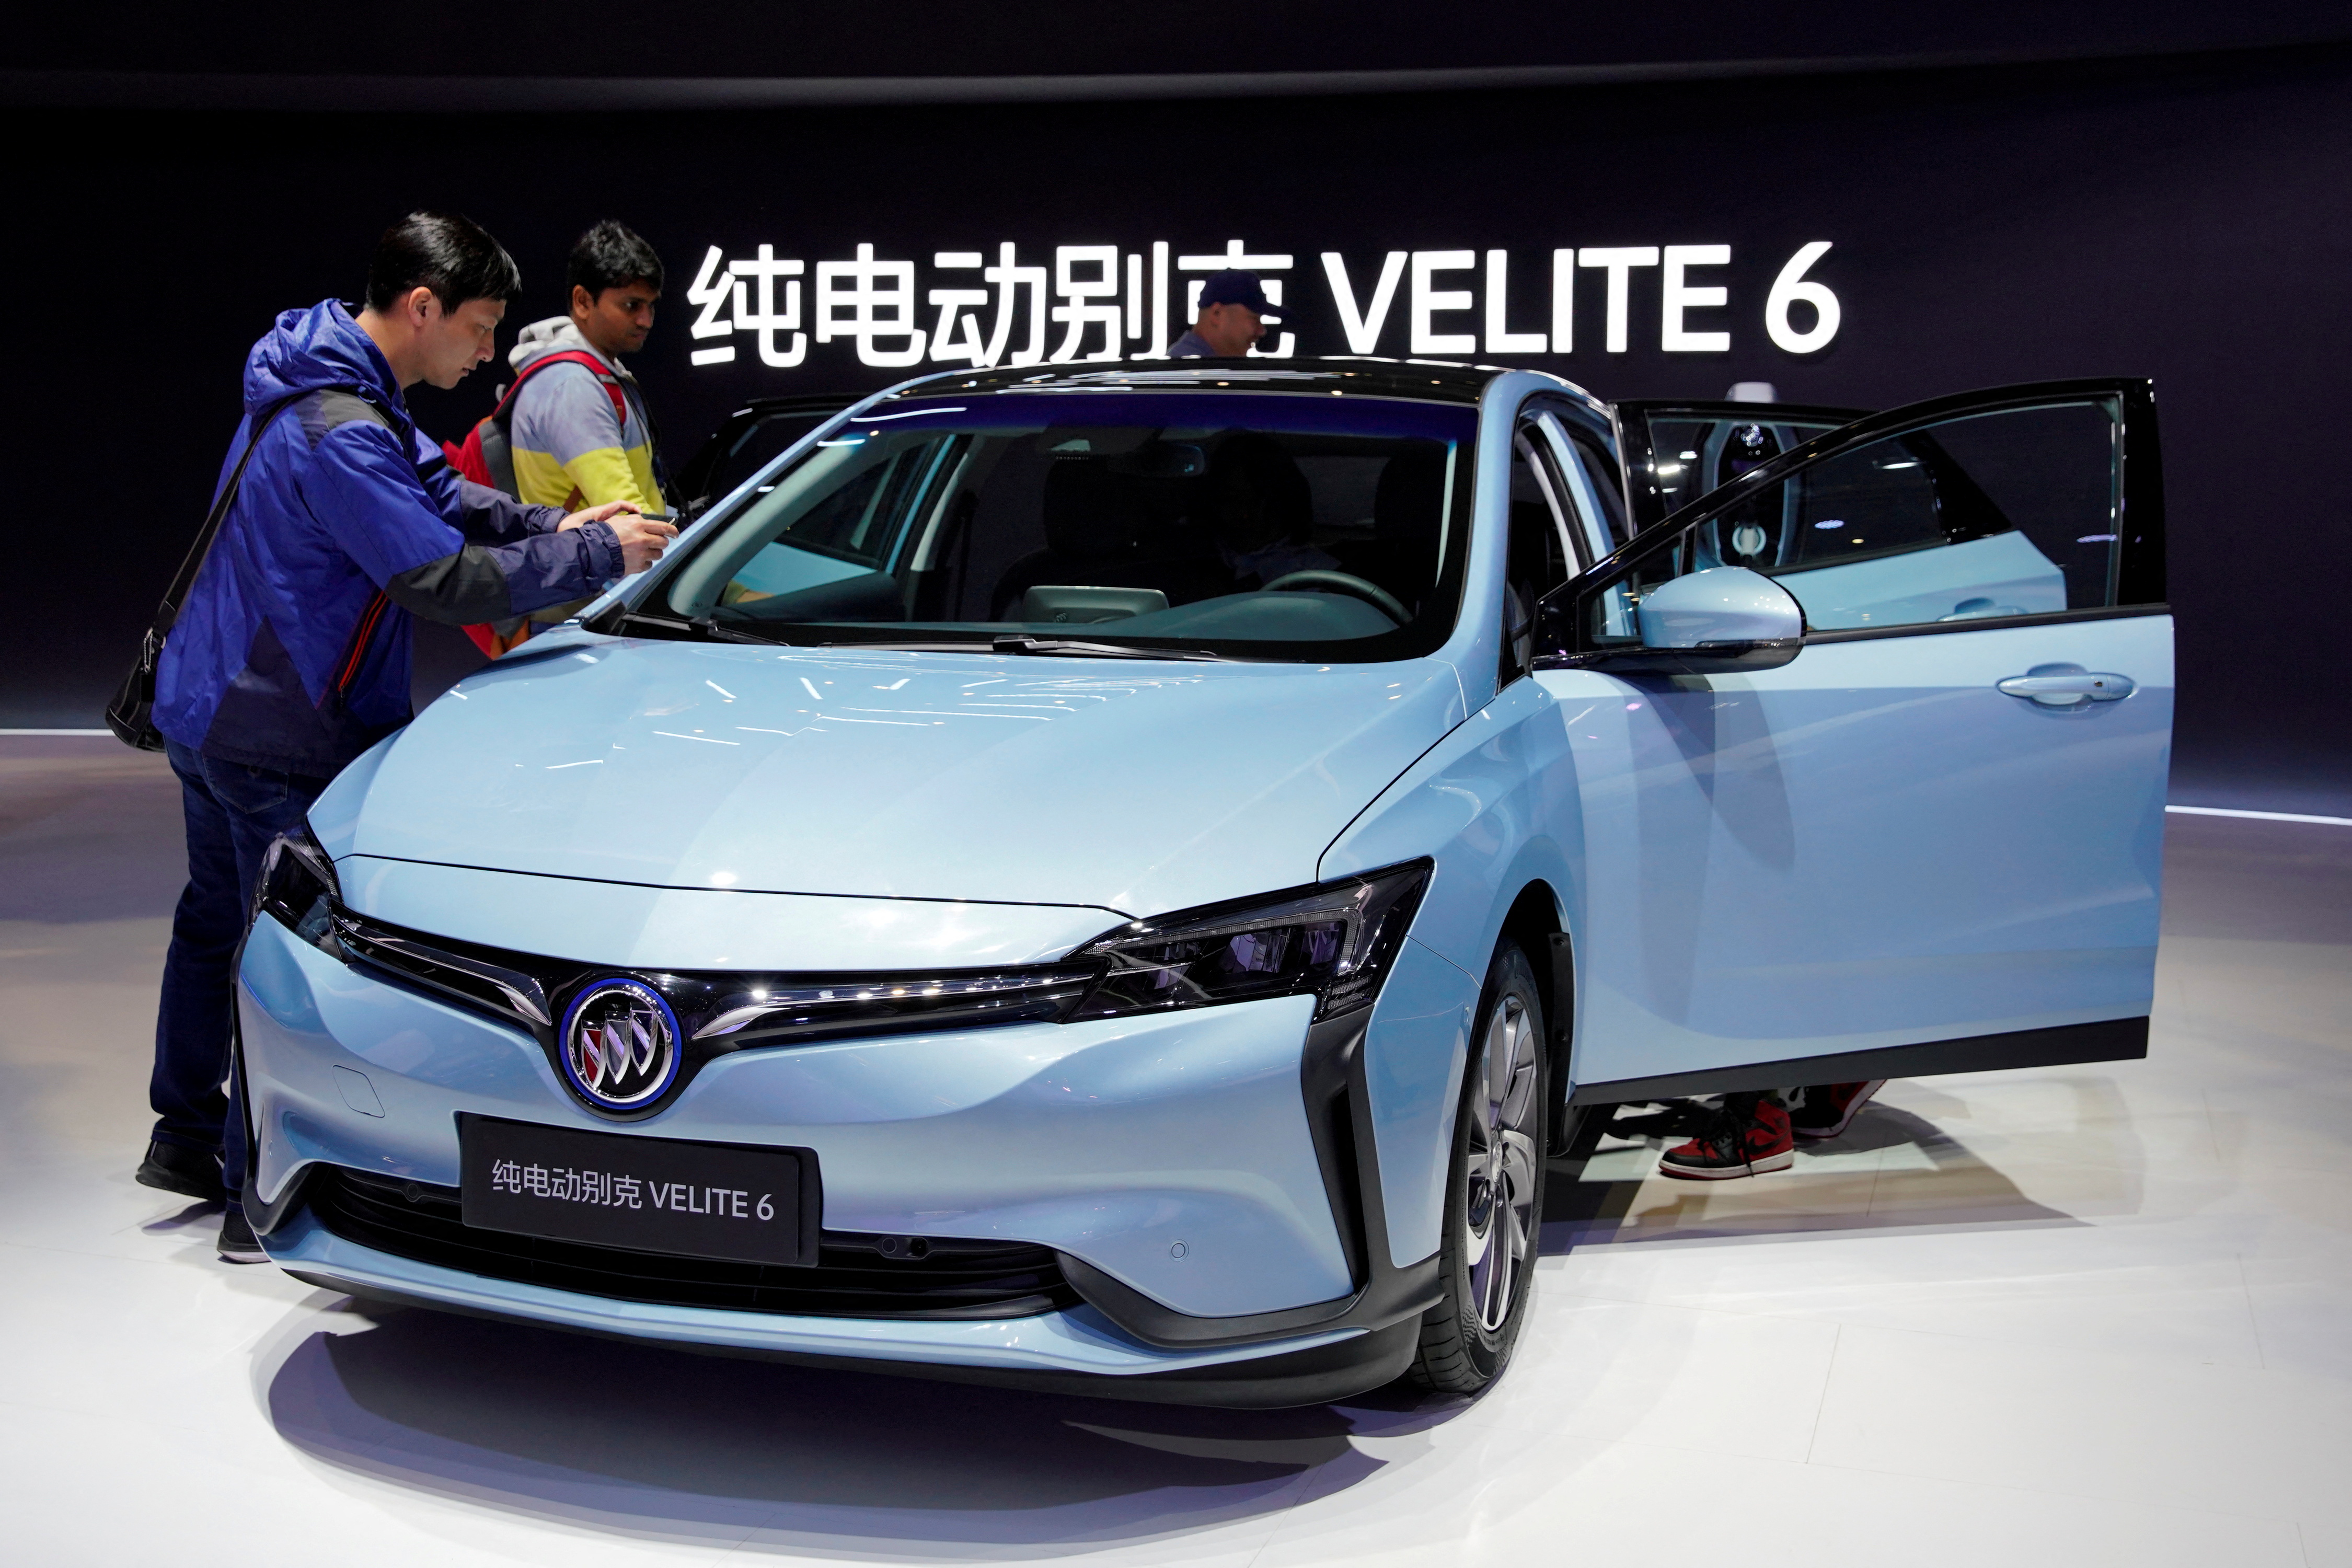 Buick's electric vehicle(EV) Velite 6 of GM is unveiled during the media day for Shanghai auto show